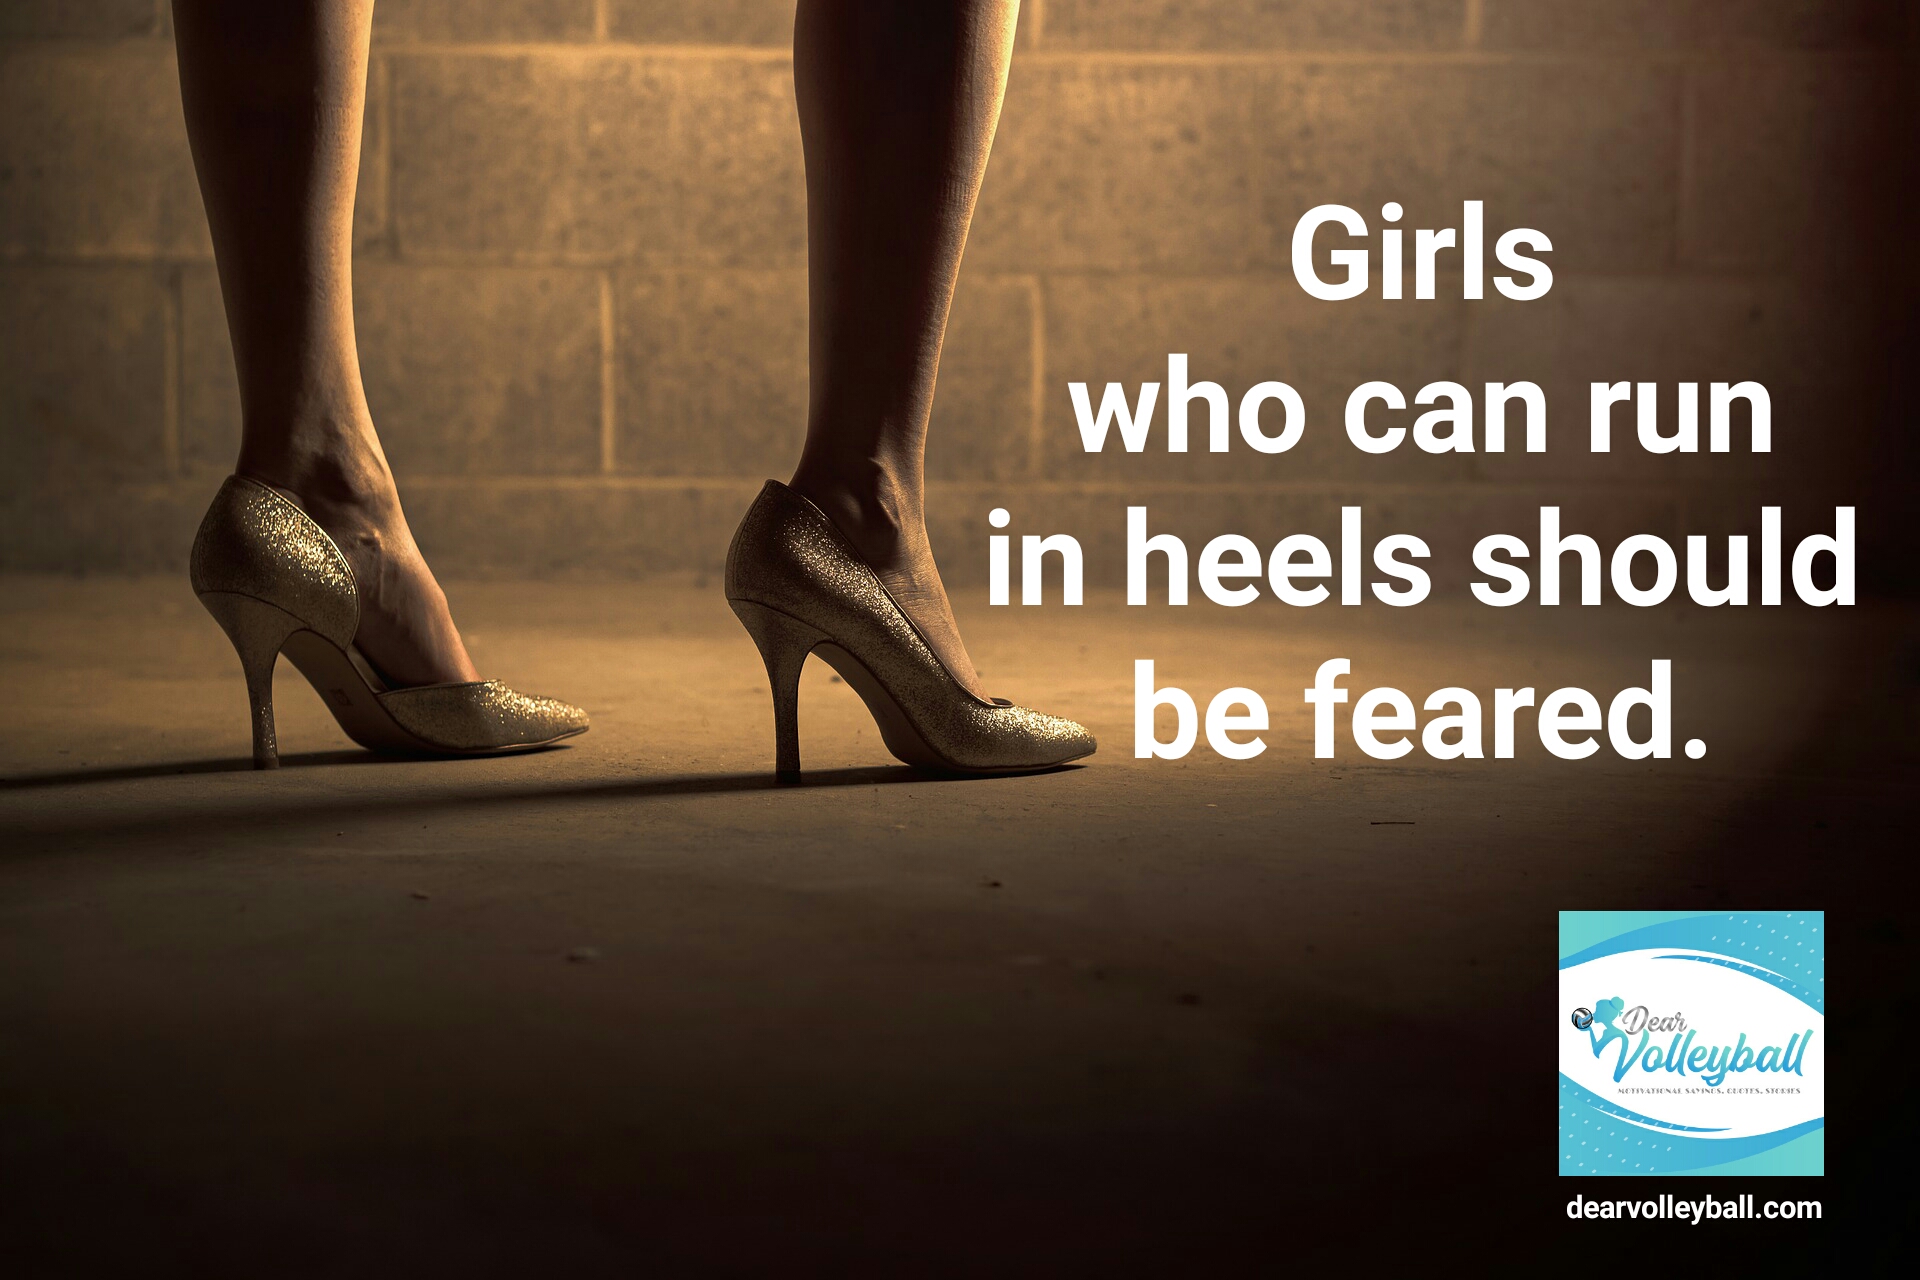 "Girls who can run in heels should be feared." and other strong girls pictures paired with an inspirational volleyball quote on Dear Volleyball.com.